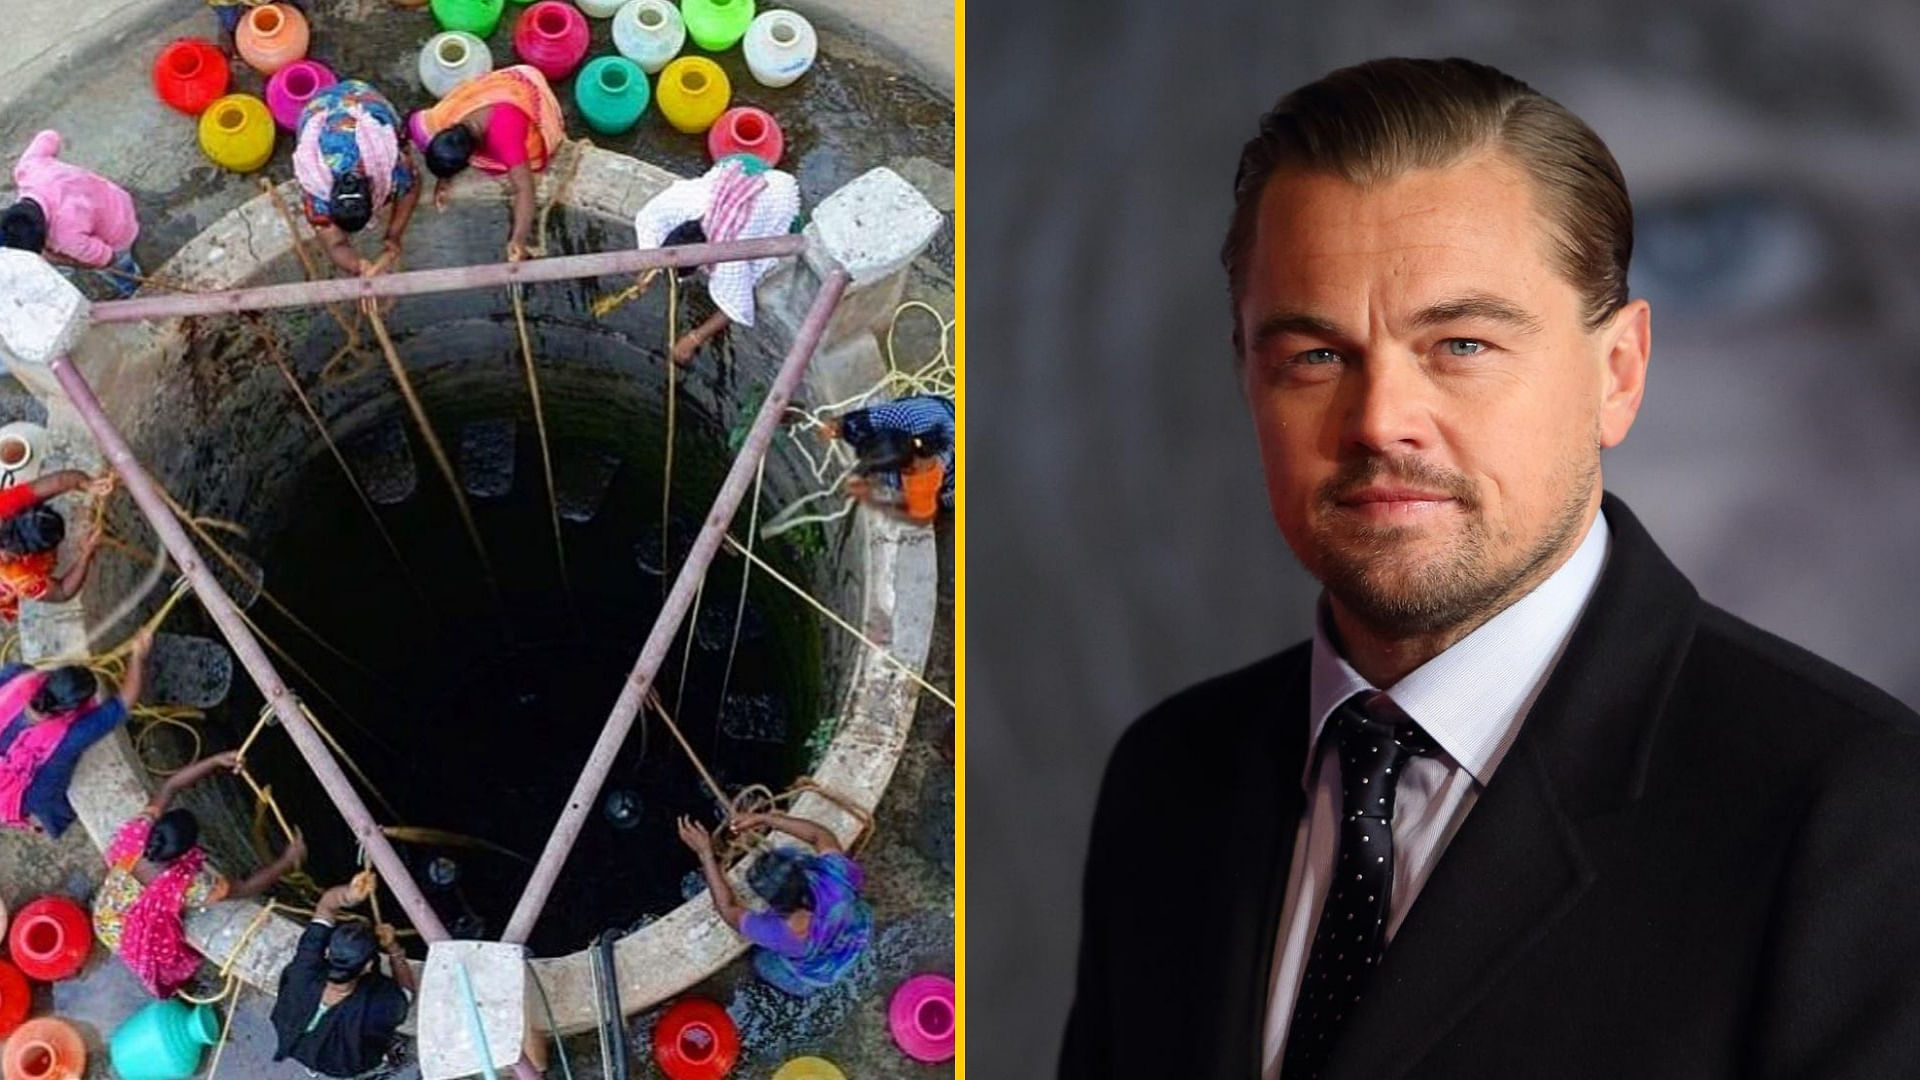 A photo of the water crisis in Tamil Nadu (L) from Leonardo DiCaprio (R)‘s Instagram.